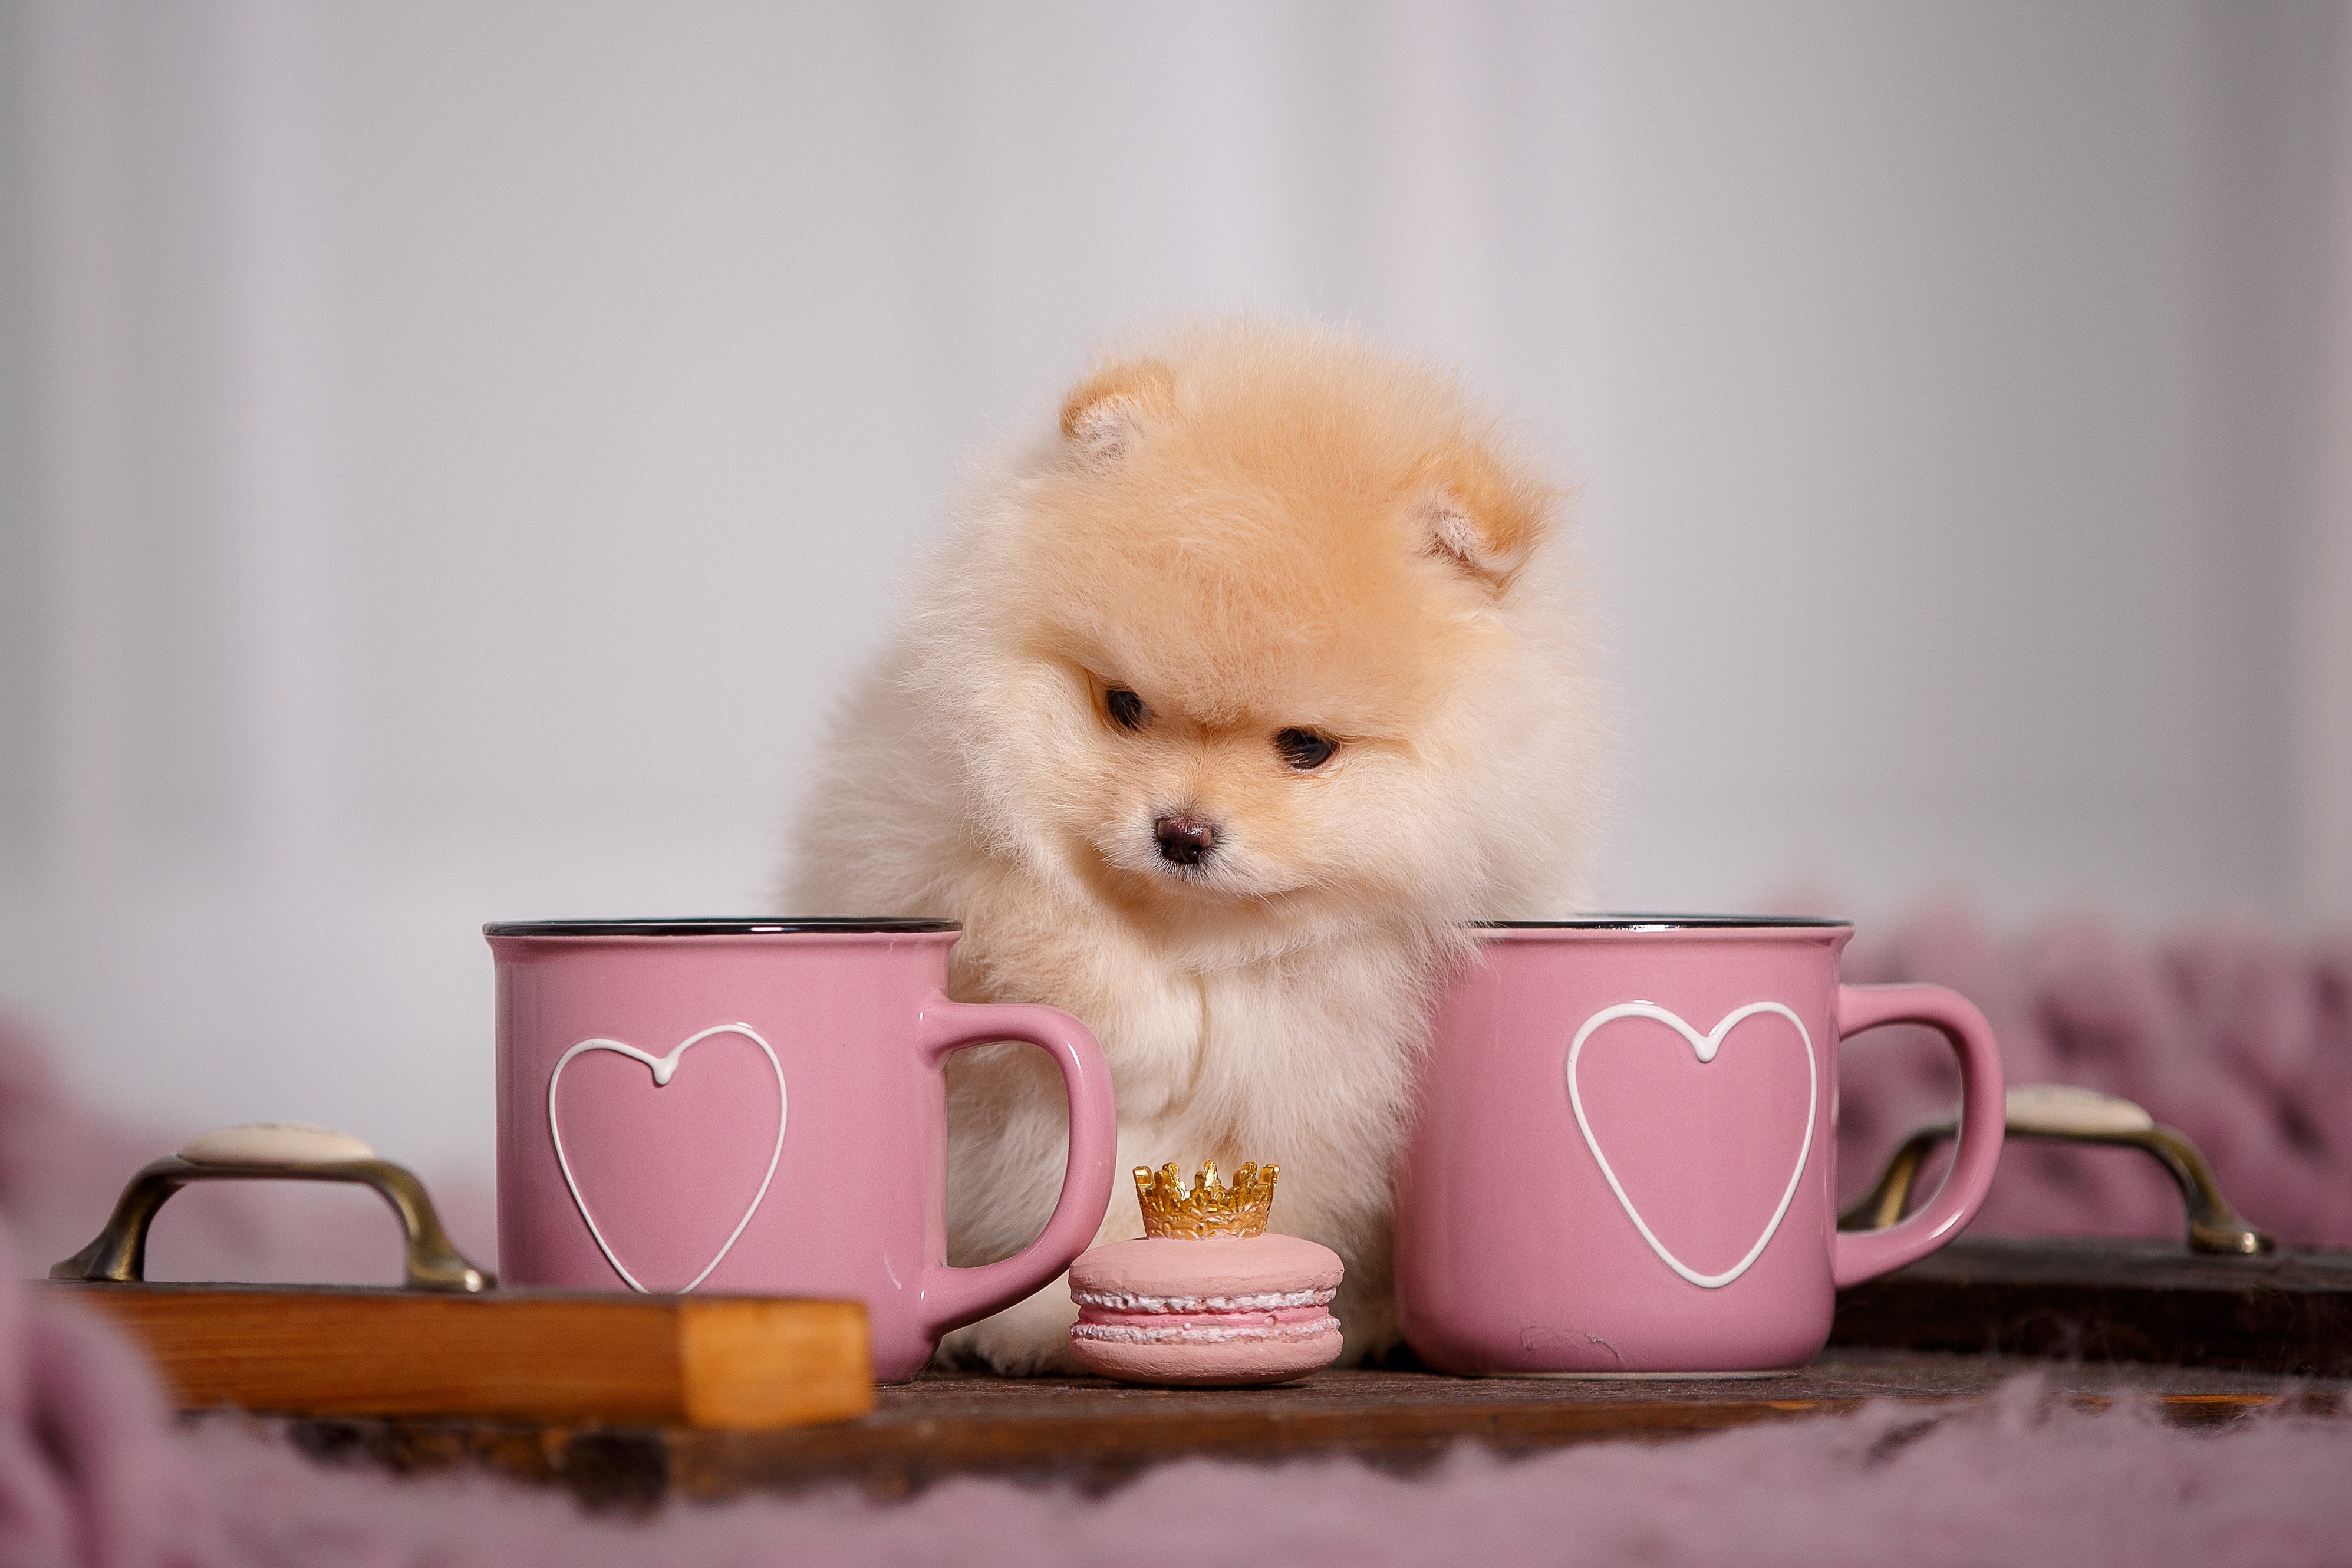 animal, pomeranian, baby animal, cup, puppy, dogs